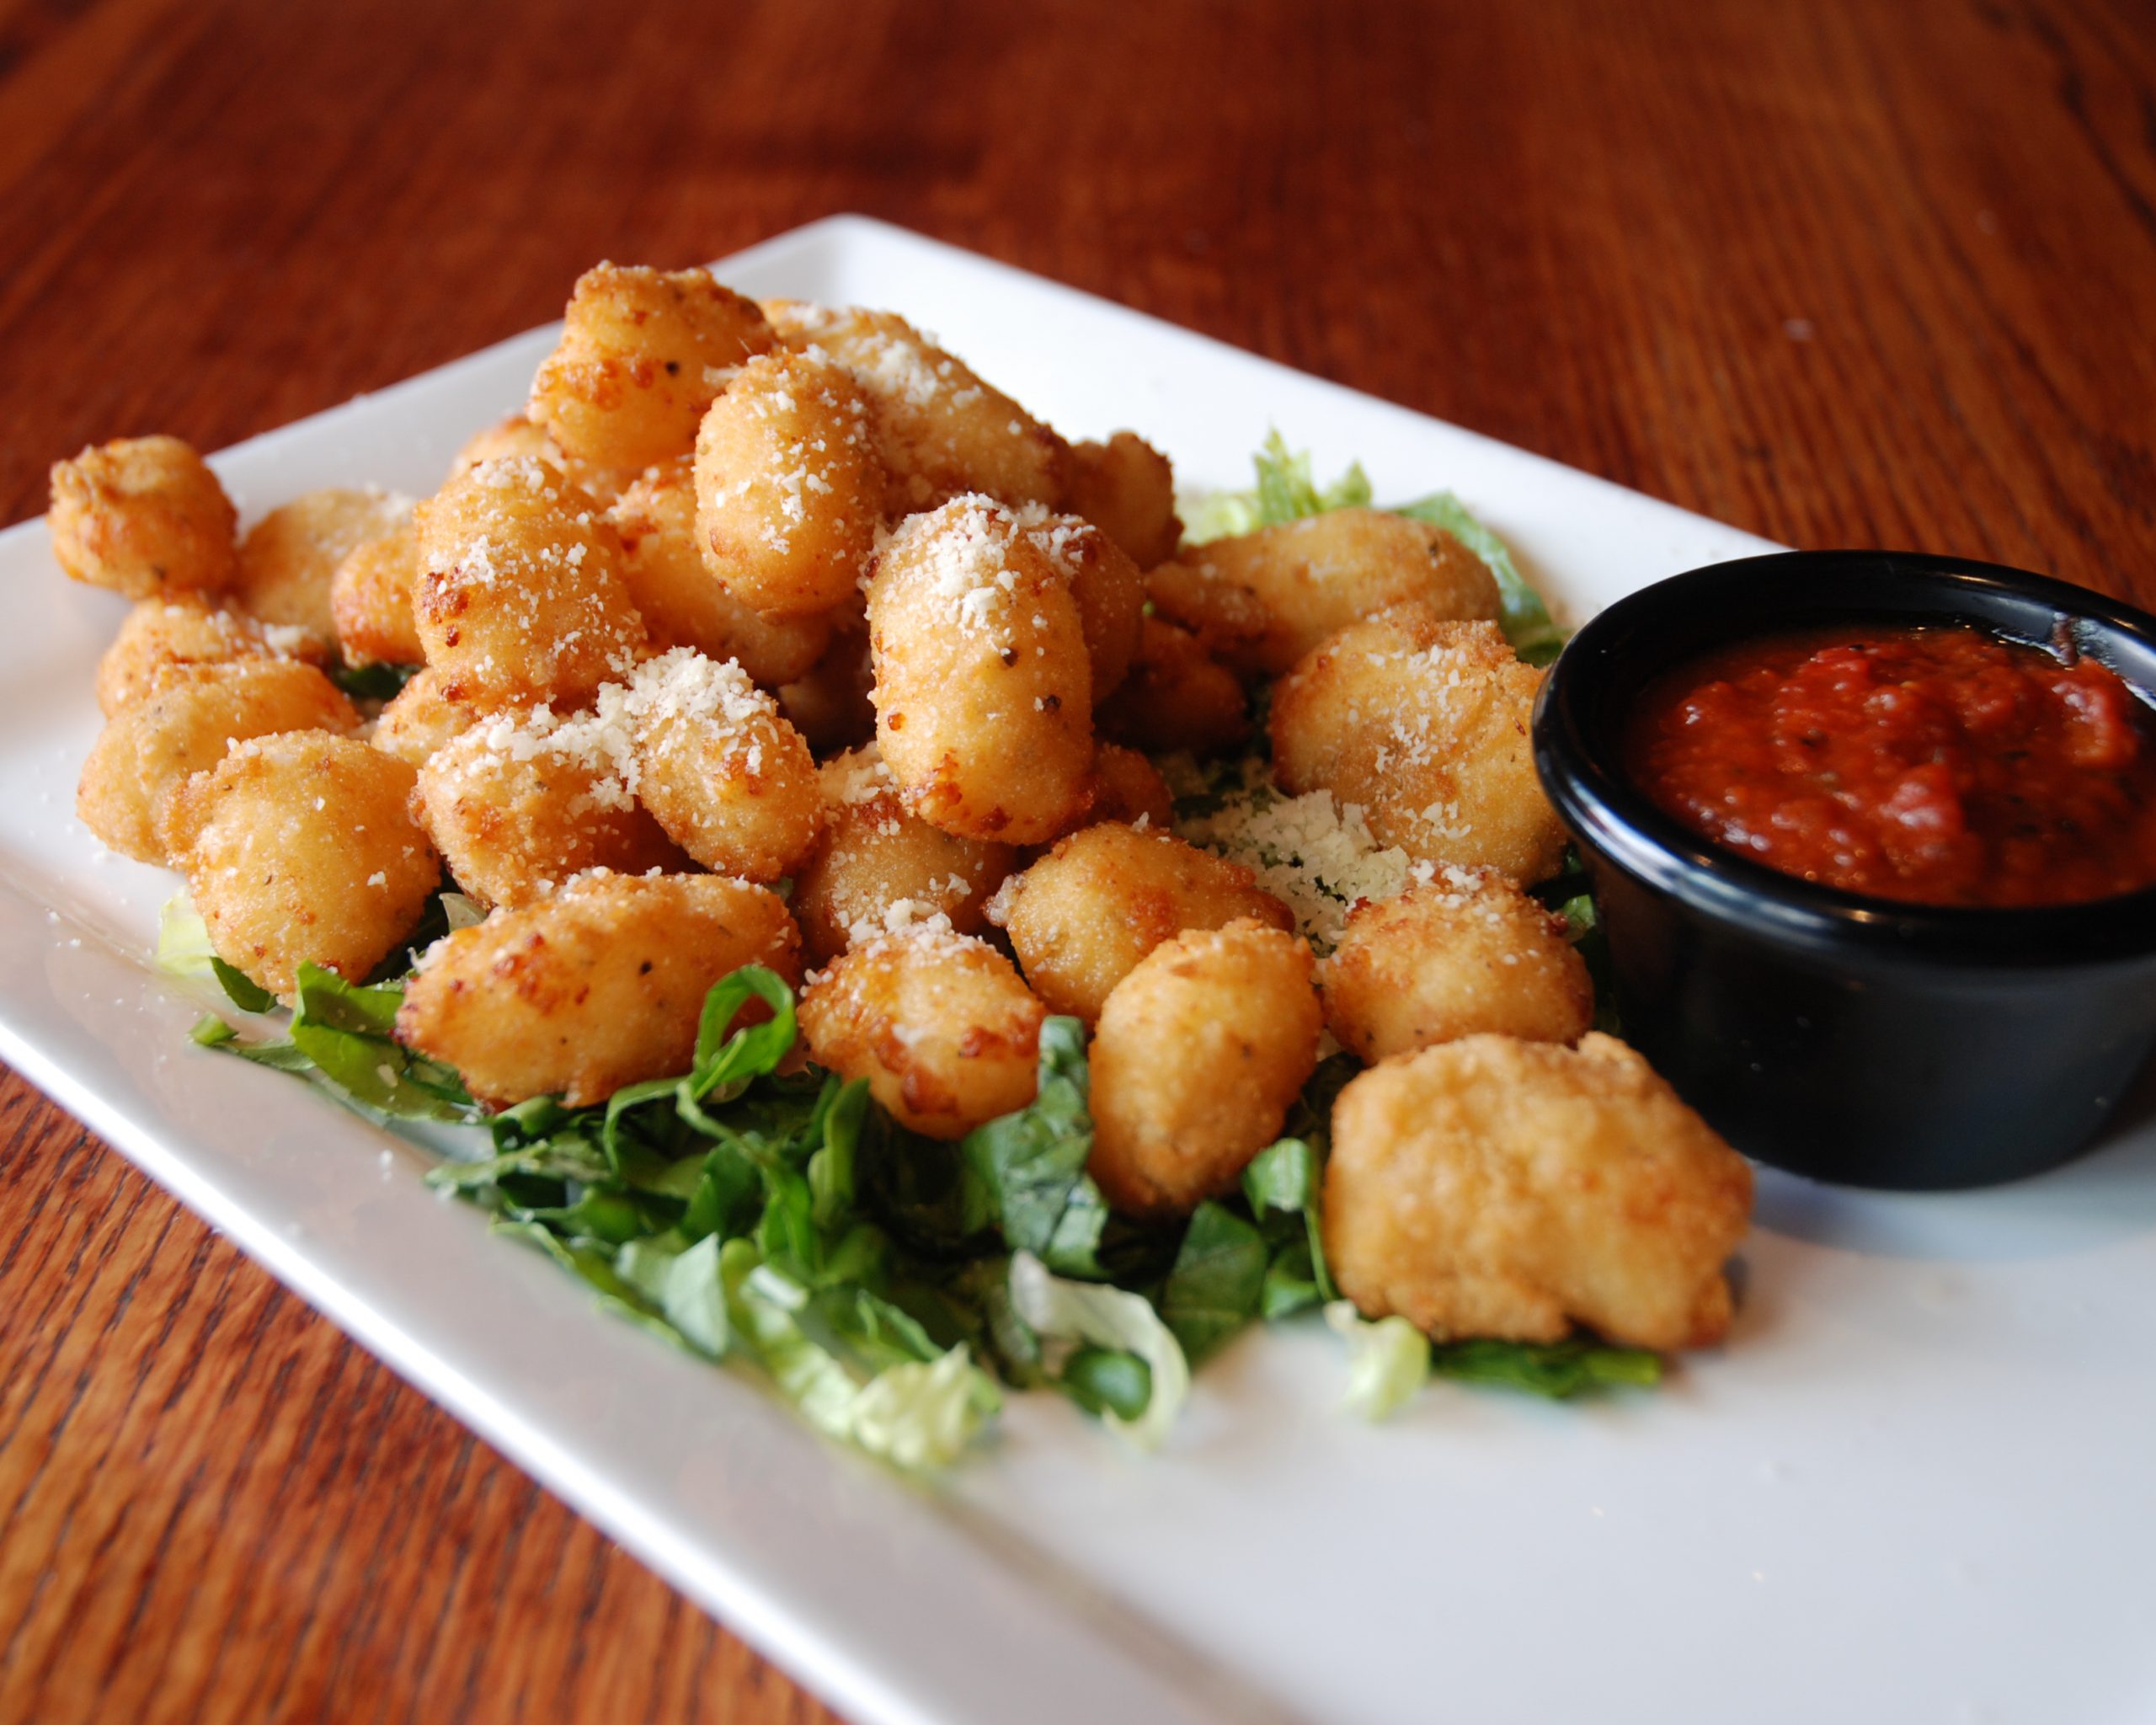 FRESH, SQUEAKY WISCONSIN CHEDDAR CHEESE CURDS